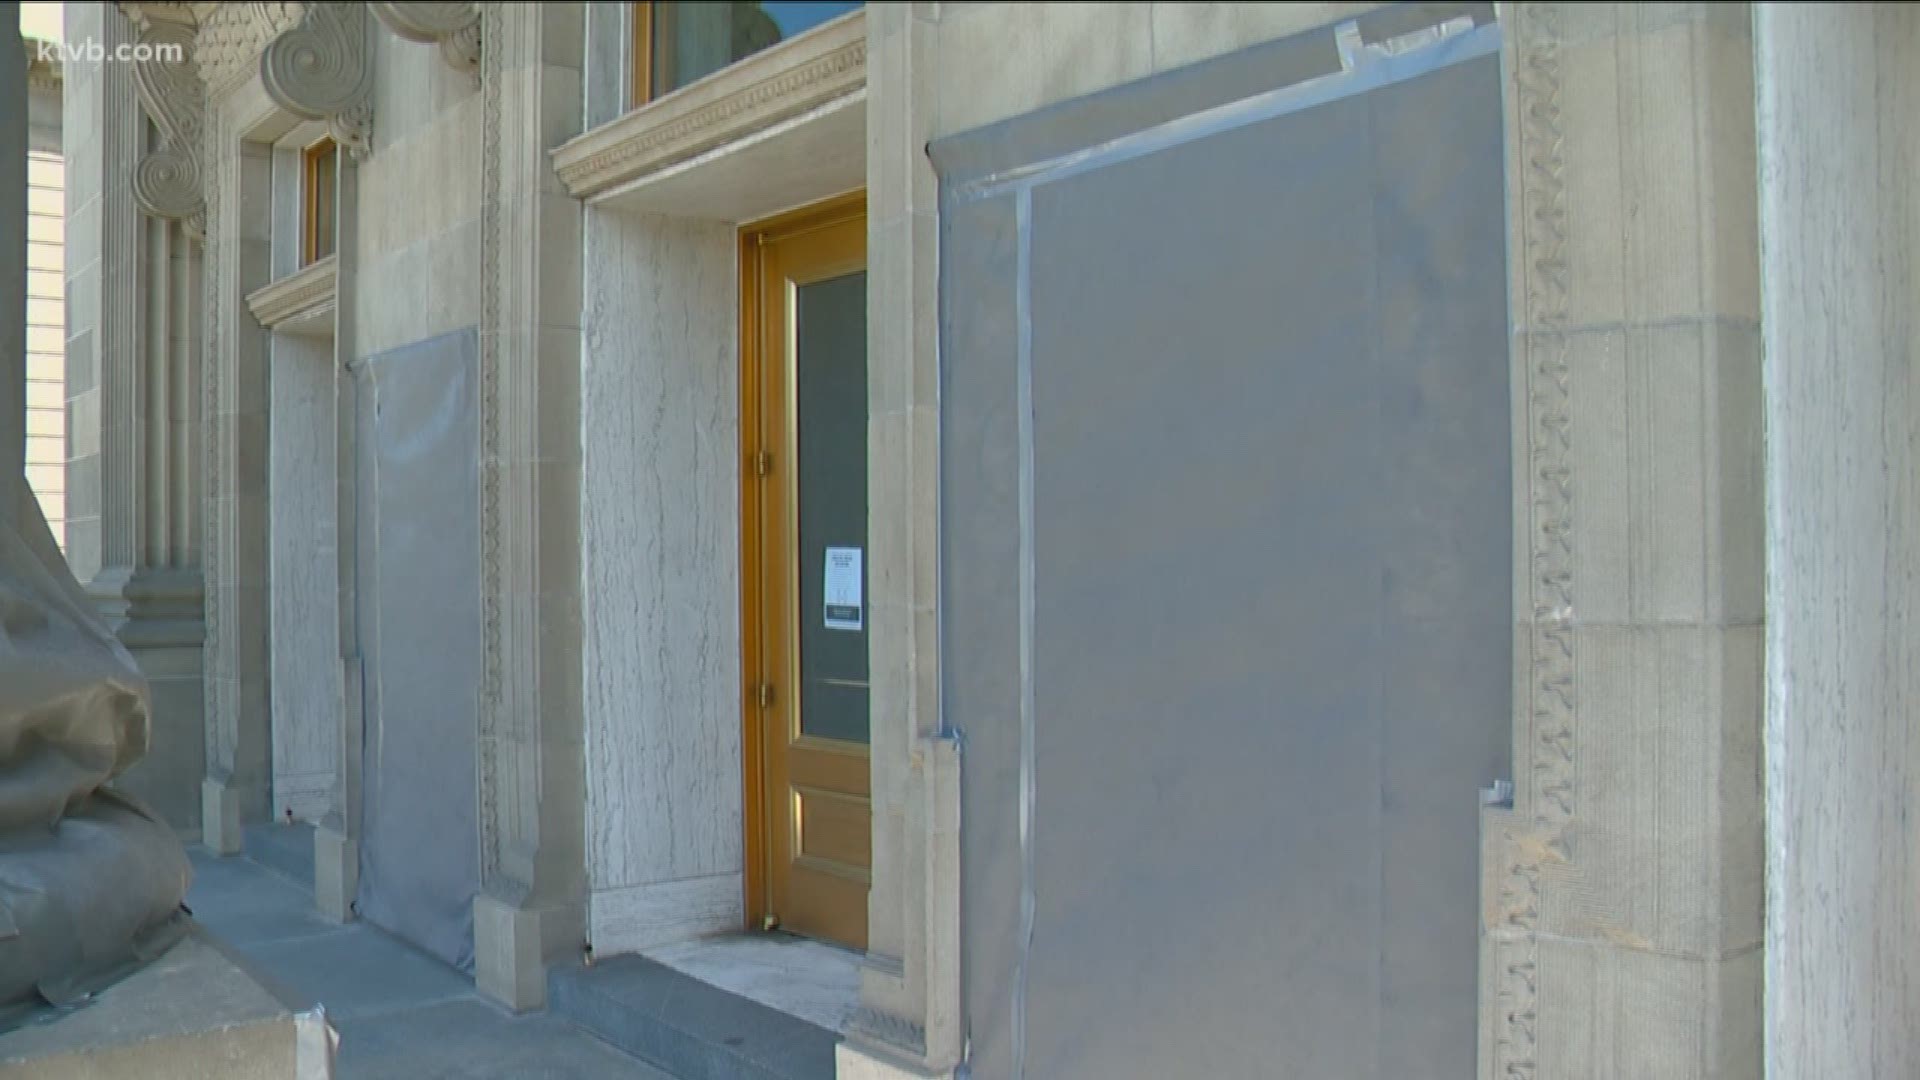 Efforts are underway to remove the graffiti, but the Division of Public Works says it won't be an easy task because that part of the building is made from sandstone.